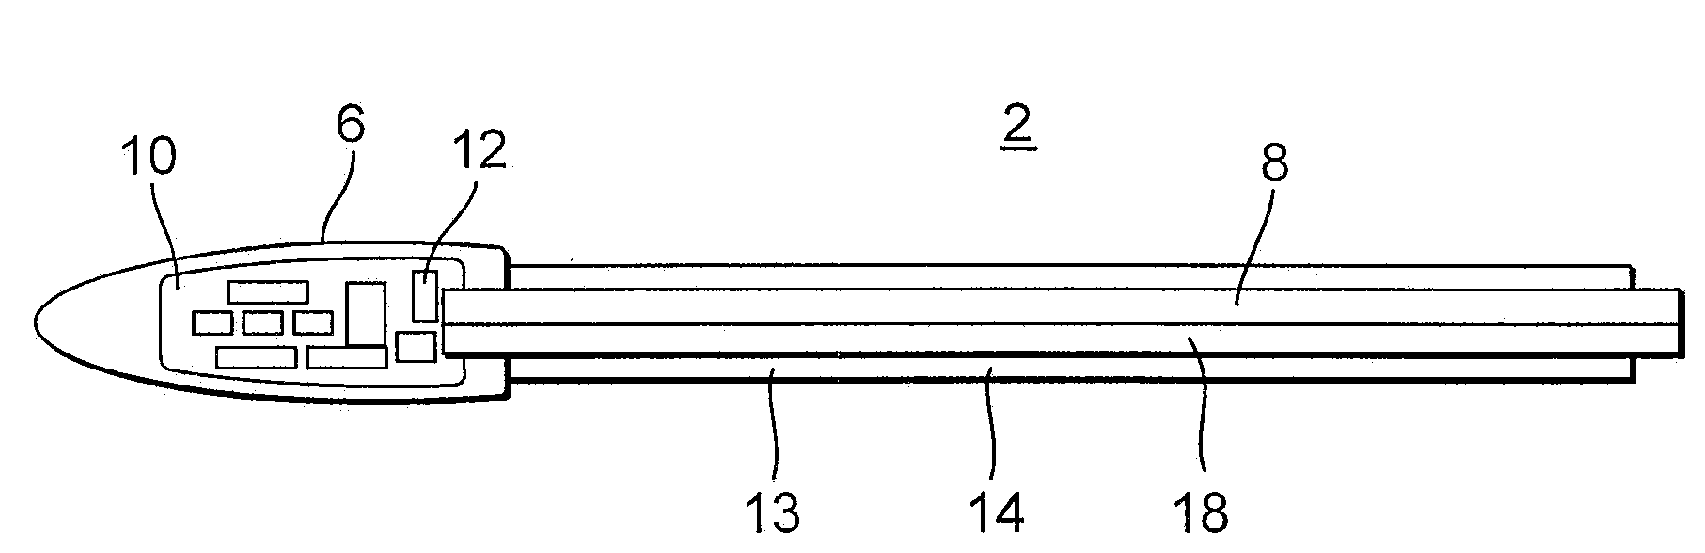 Analysis device for in vivo determination of an analyte in a patient's body